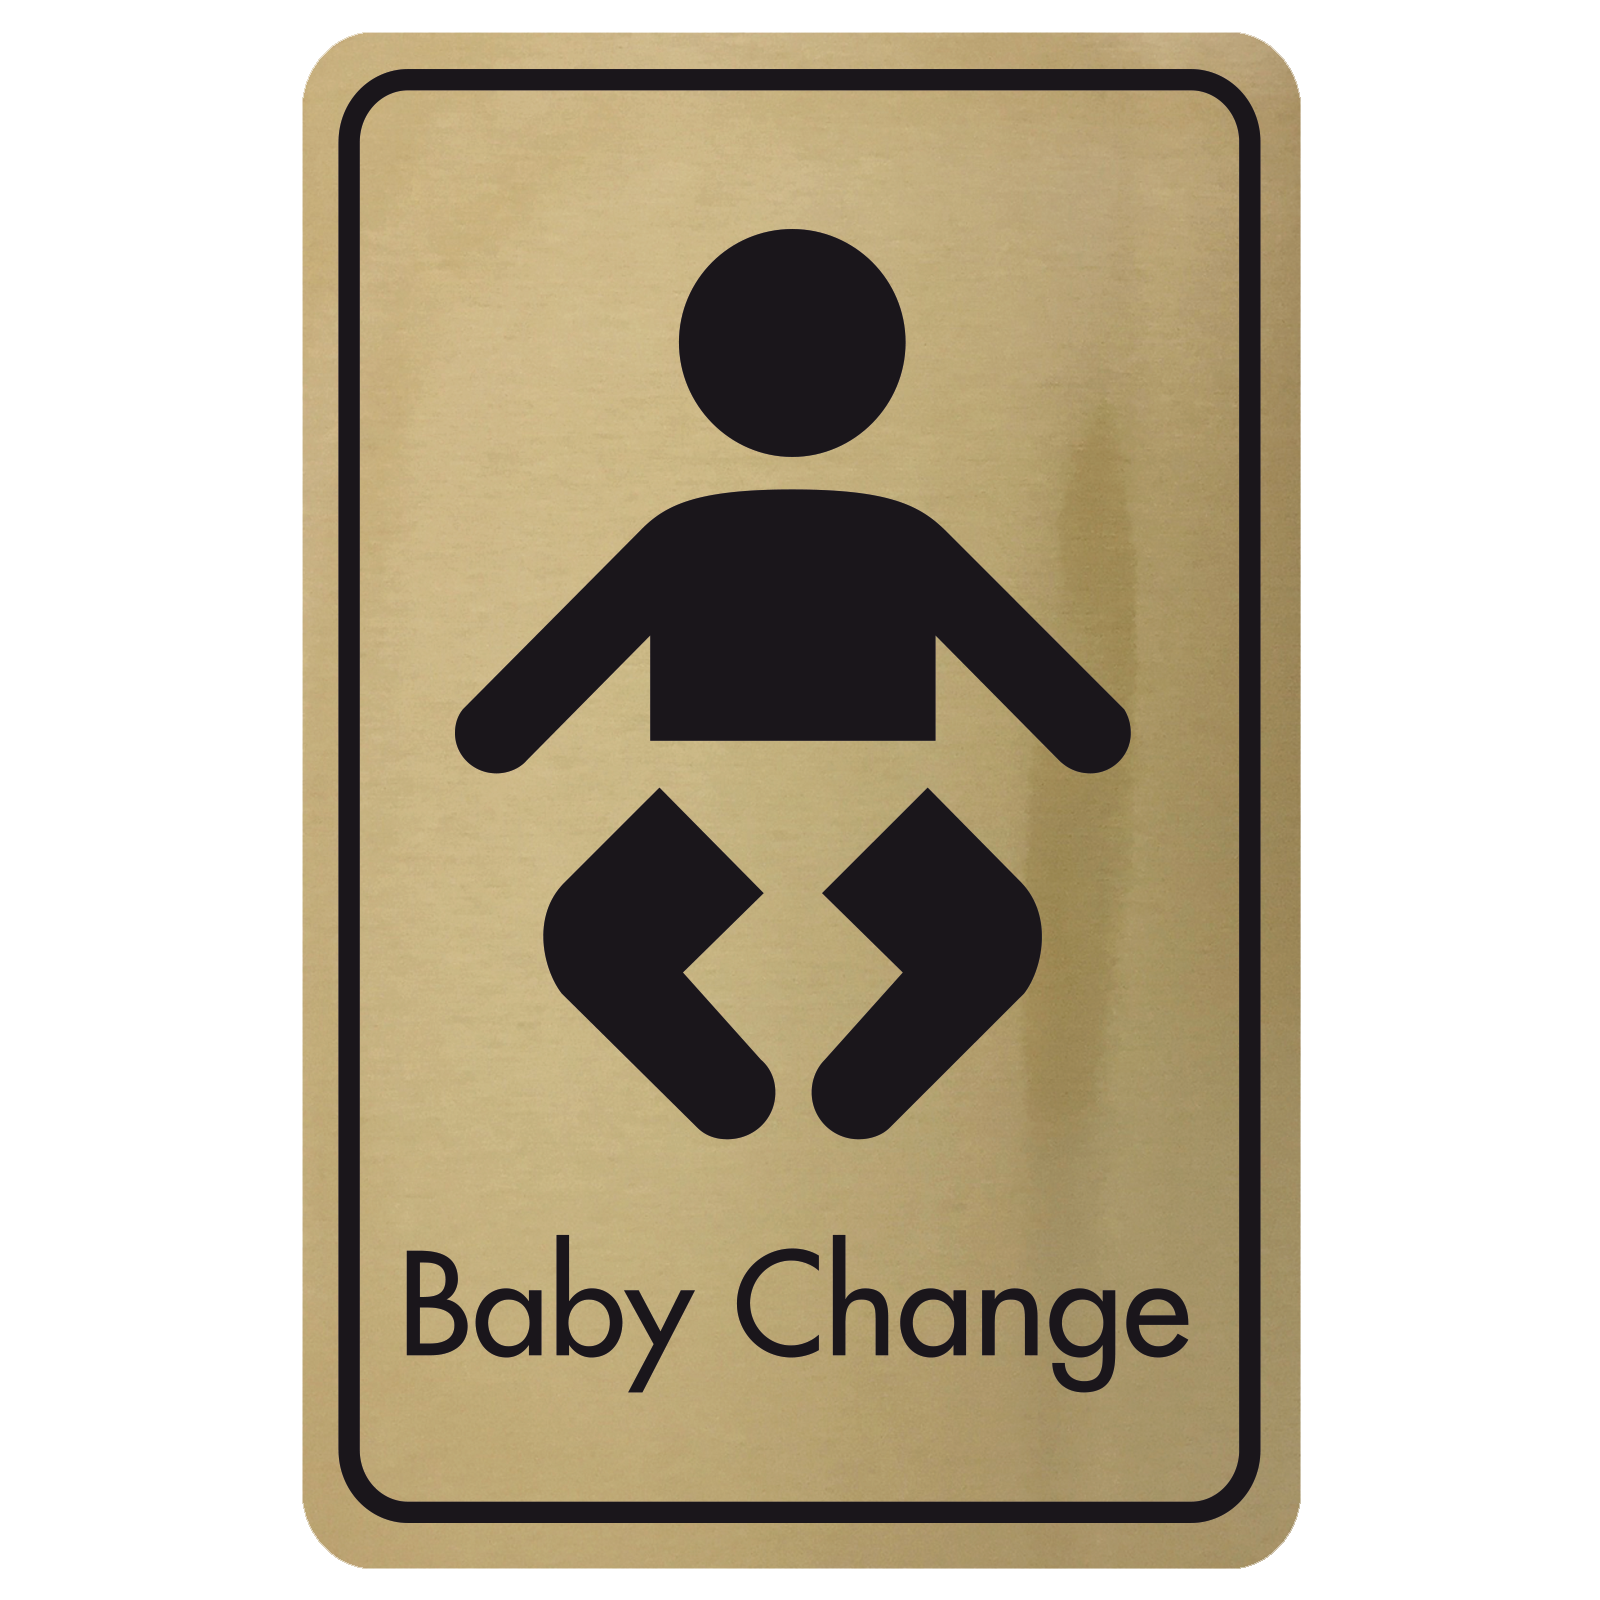 Large Baby Changing Door Sign - Black on Gold